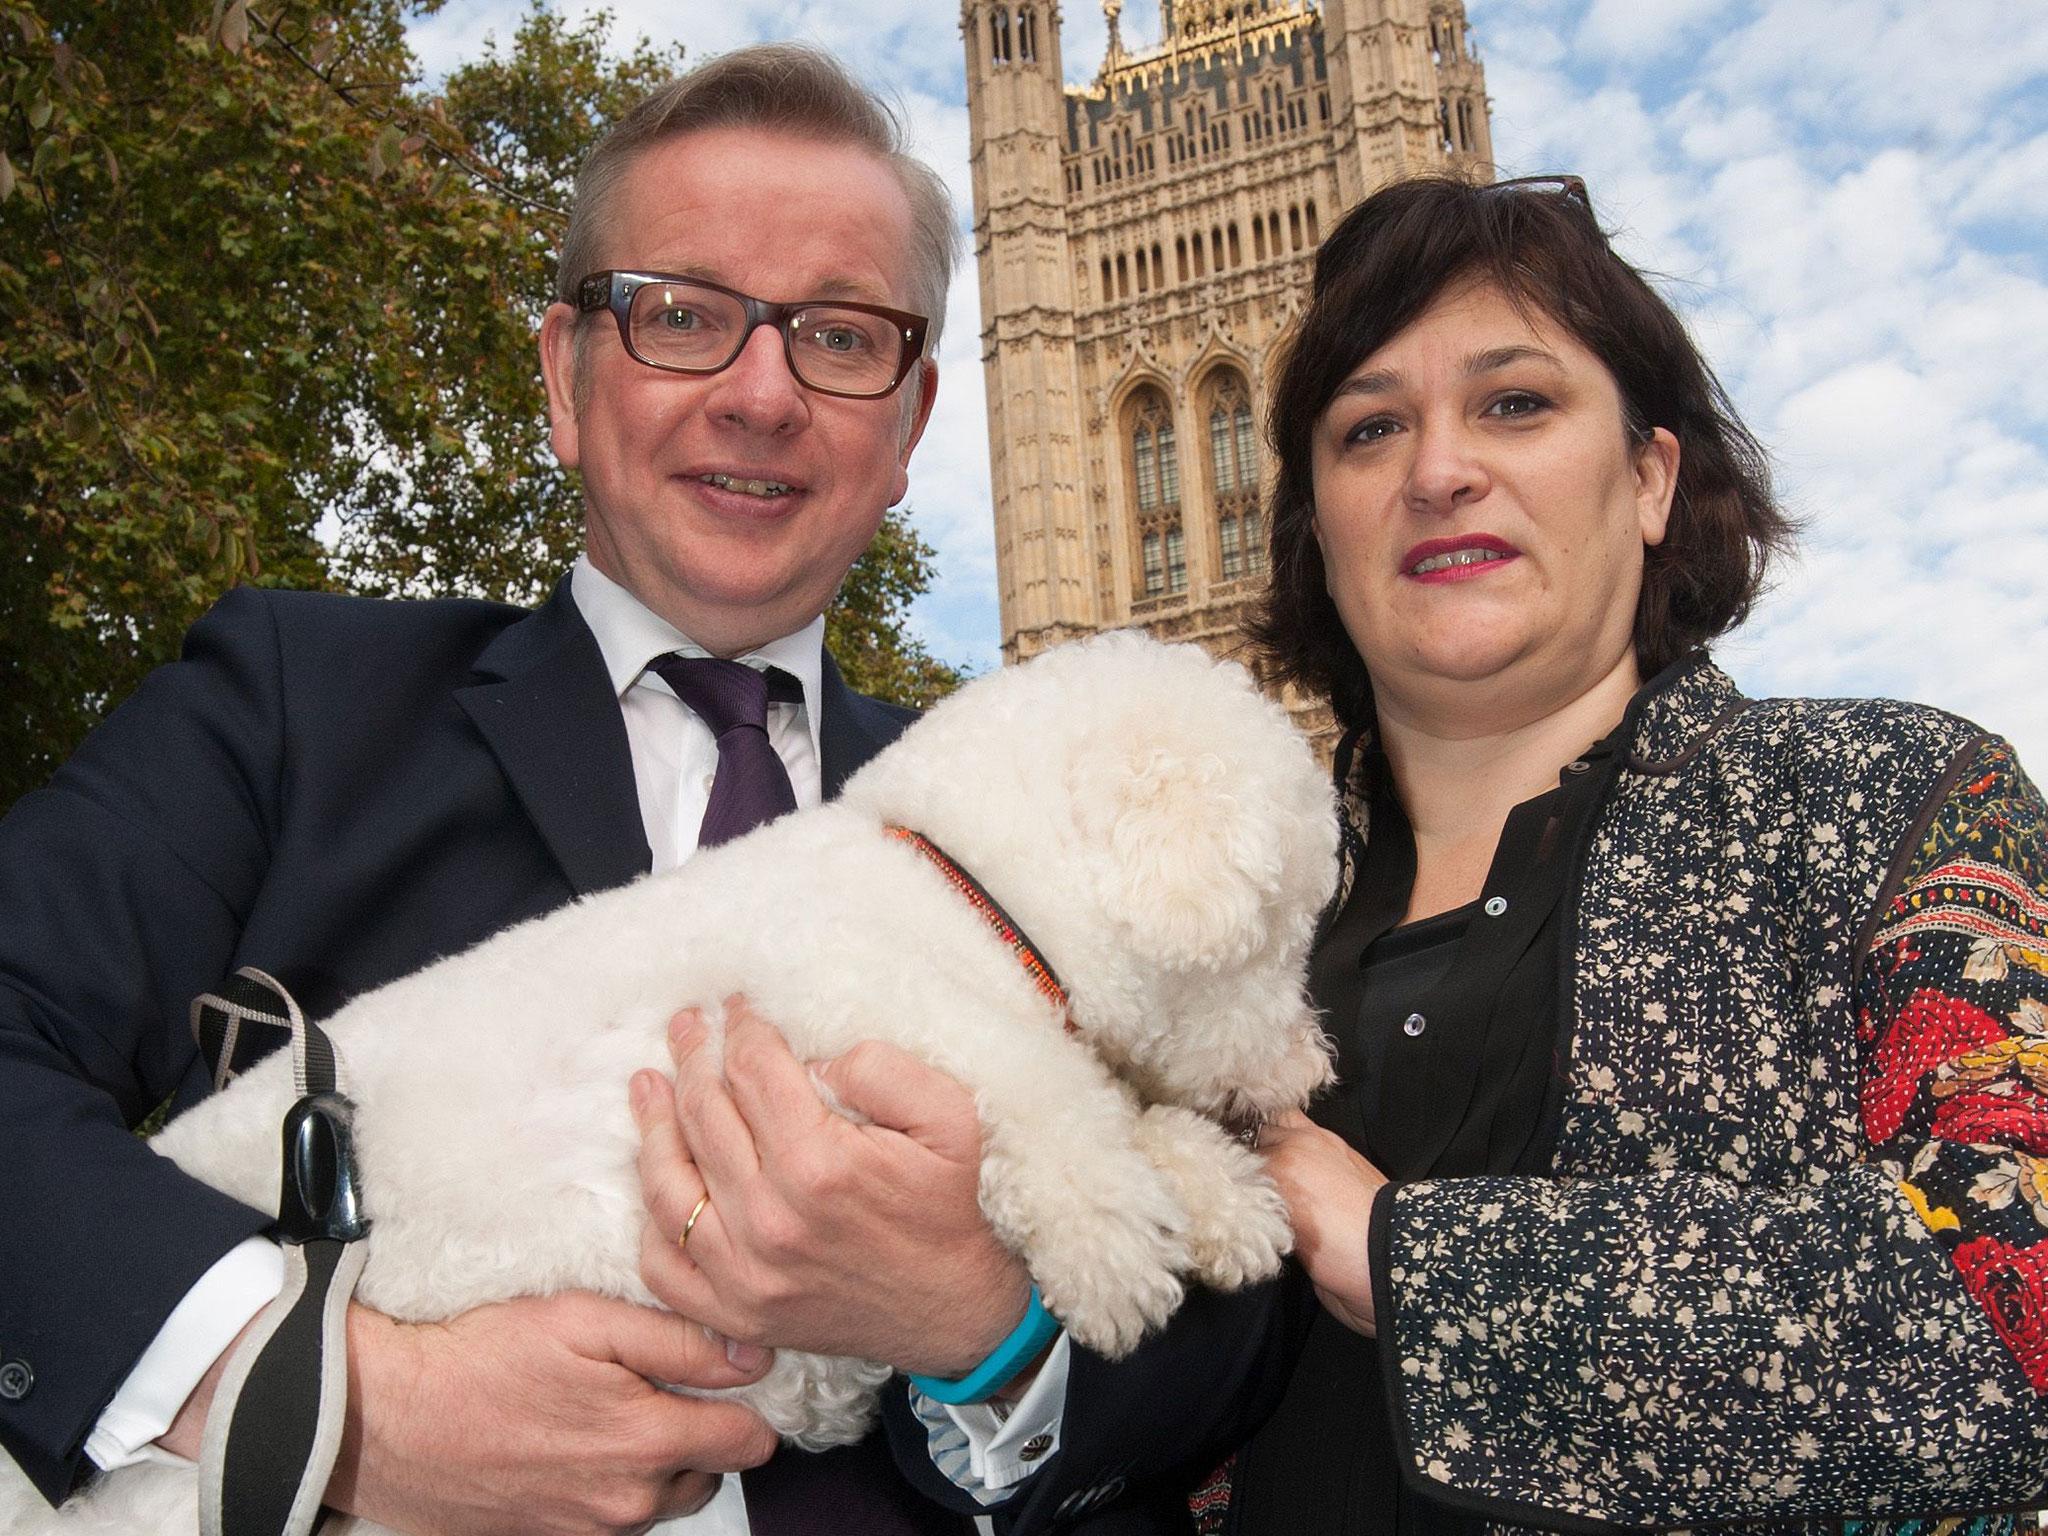 Daily Mail journalist Sarah Vine and her husband Michael Gove